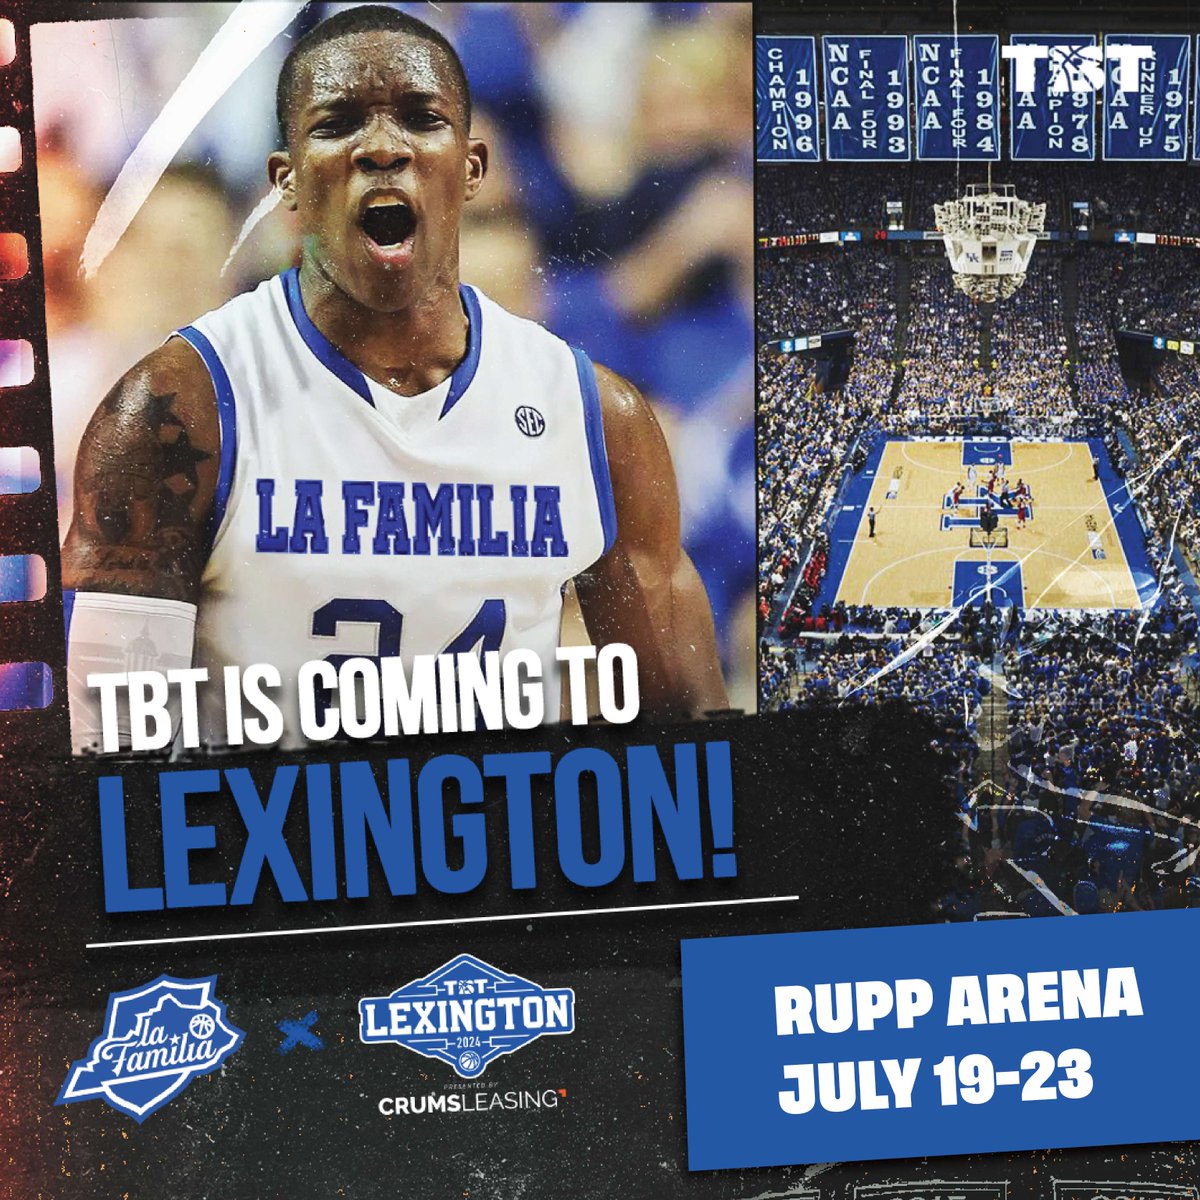 Are you missing basketball season already? We sure are! Luckily TBT is bringing the heat to Rupp Arena with the Lexington Regional from July 19-23. Featuring Kentucky alumni team La Familia! Get tickets now at ow.ly/R2Mj50RKLrv